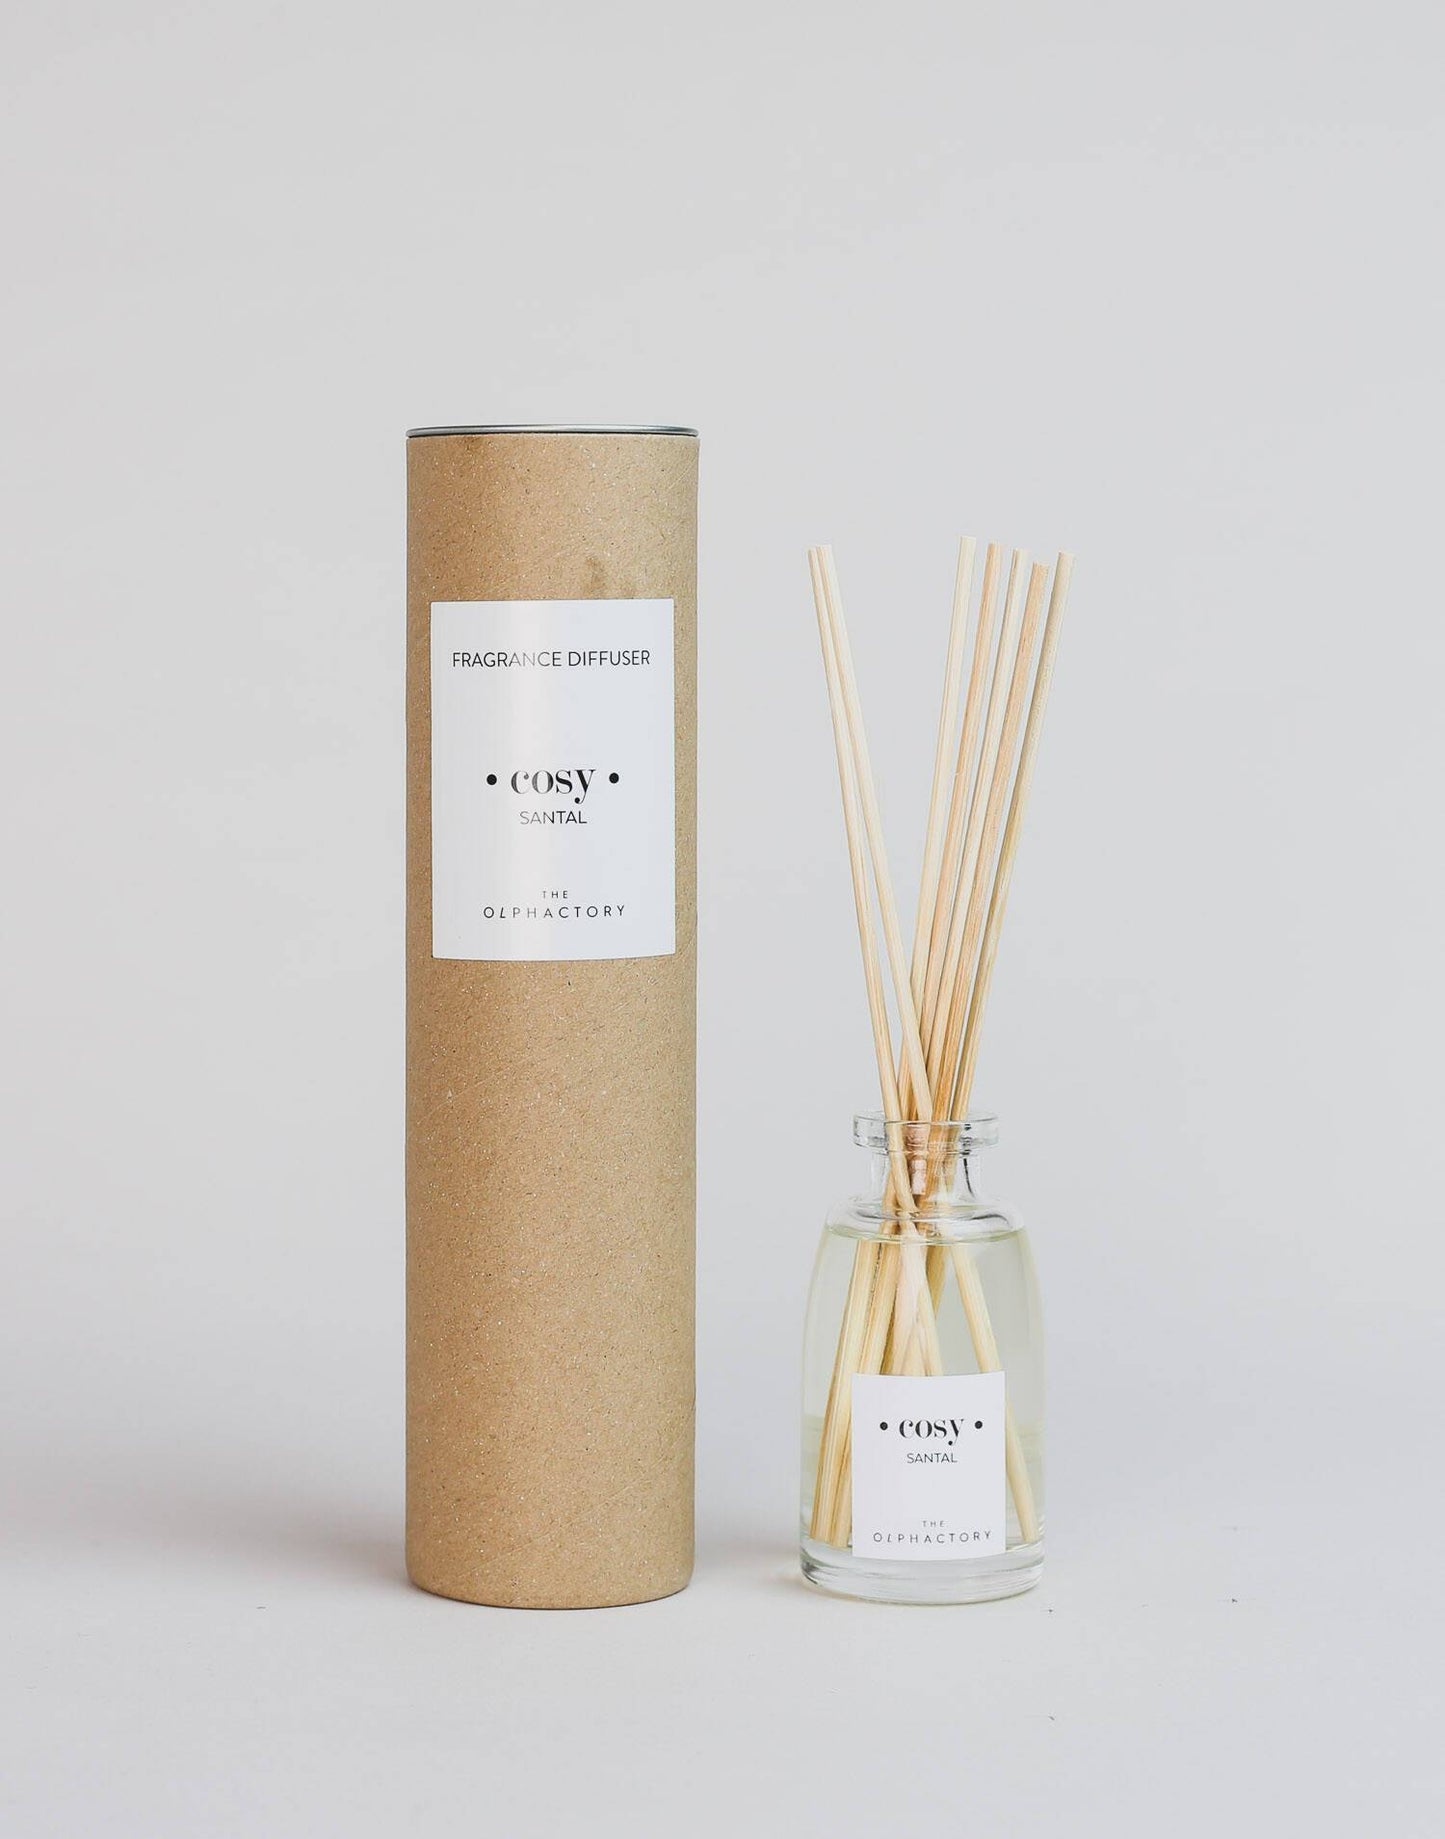 Olphactory reed diffuser